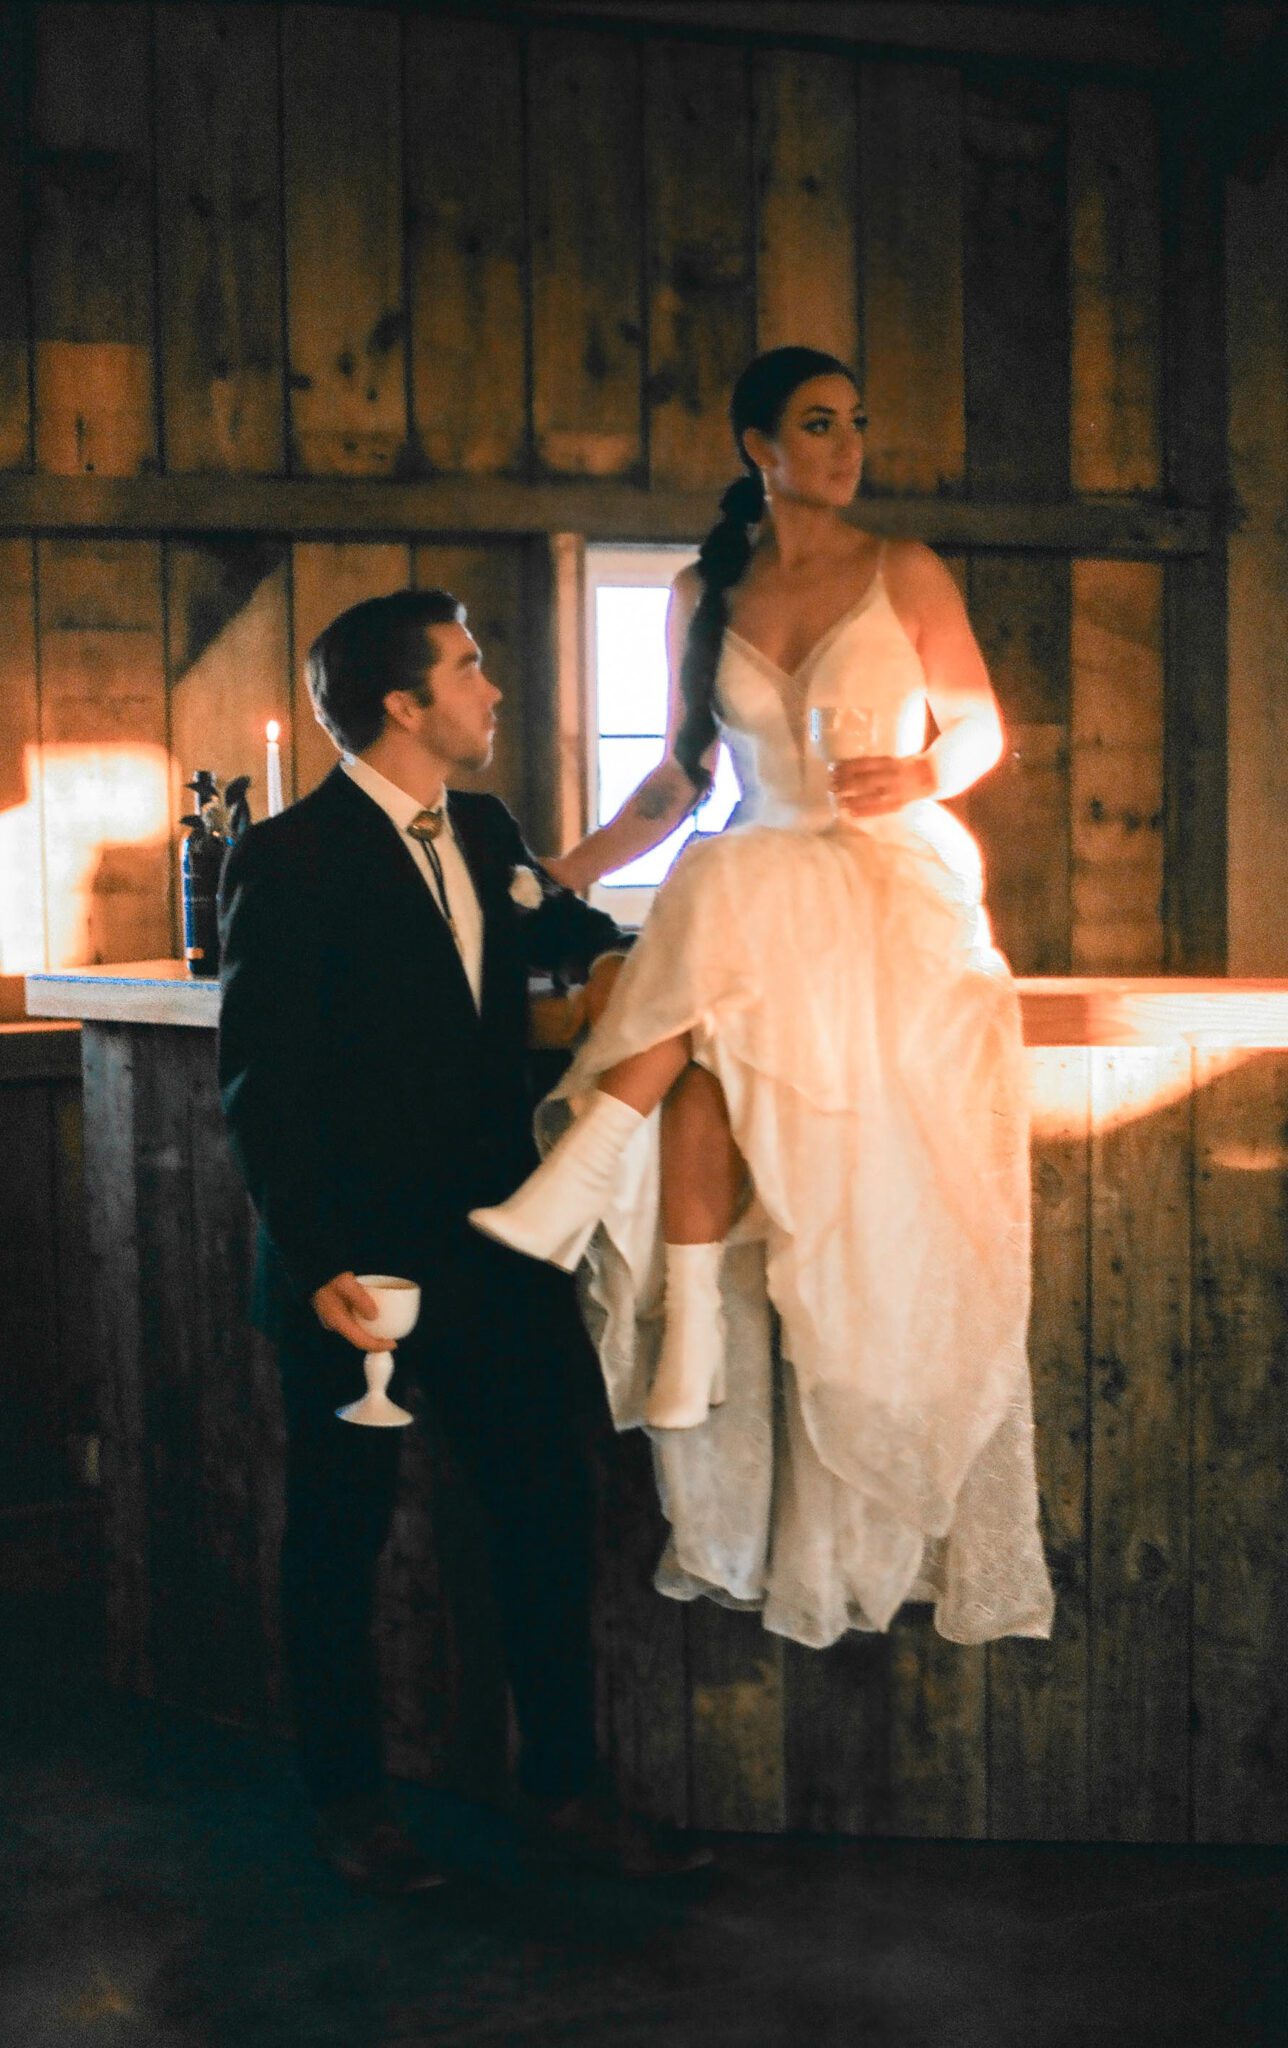 Wedding Inspiration With An Updated Take on Country Chic Wedding Style at Countryside Barn in Lethbridge Alberta, warm romantic wedding photography of bride and groom, vintage wedding attire, bride and groom at wedding bar